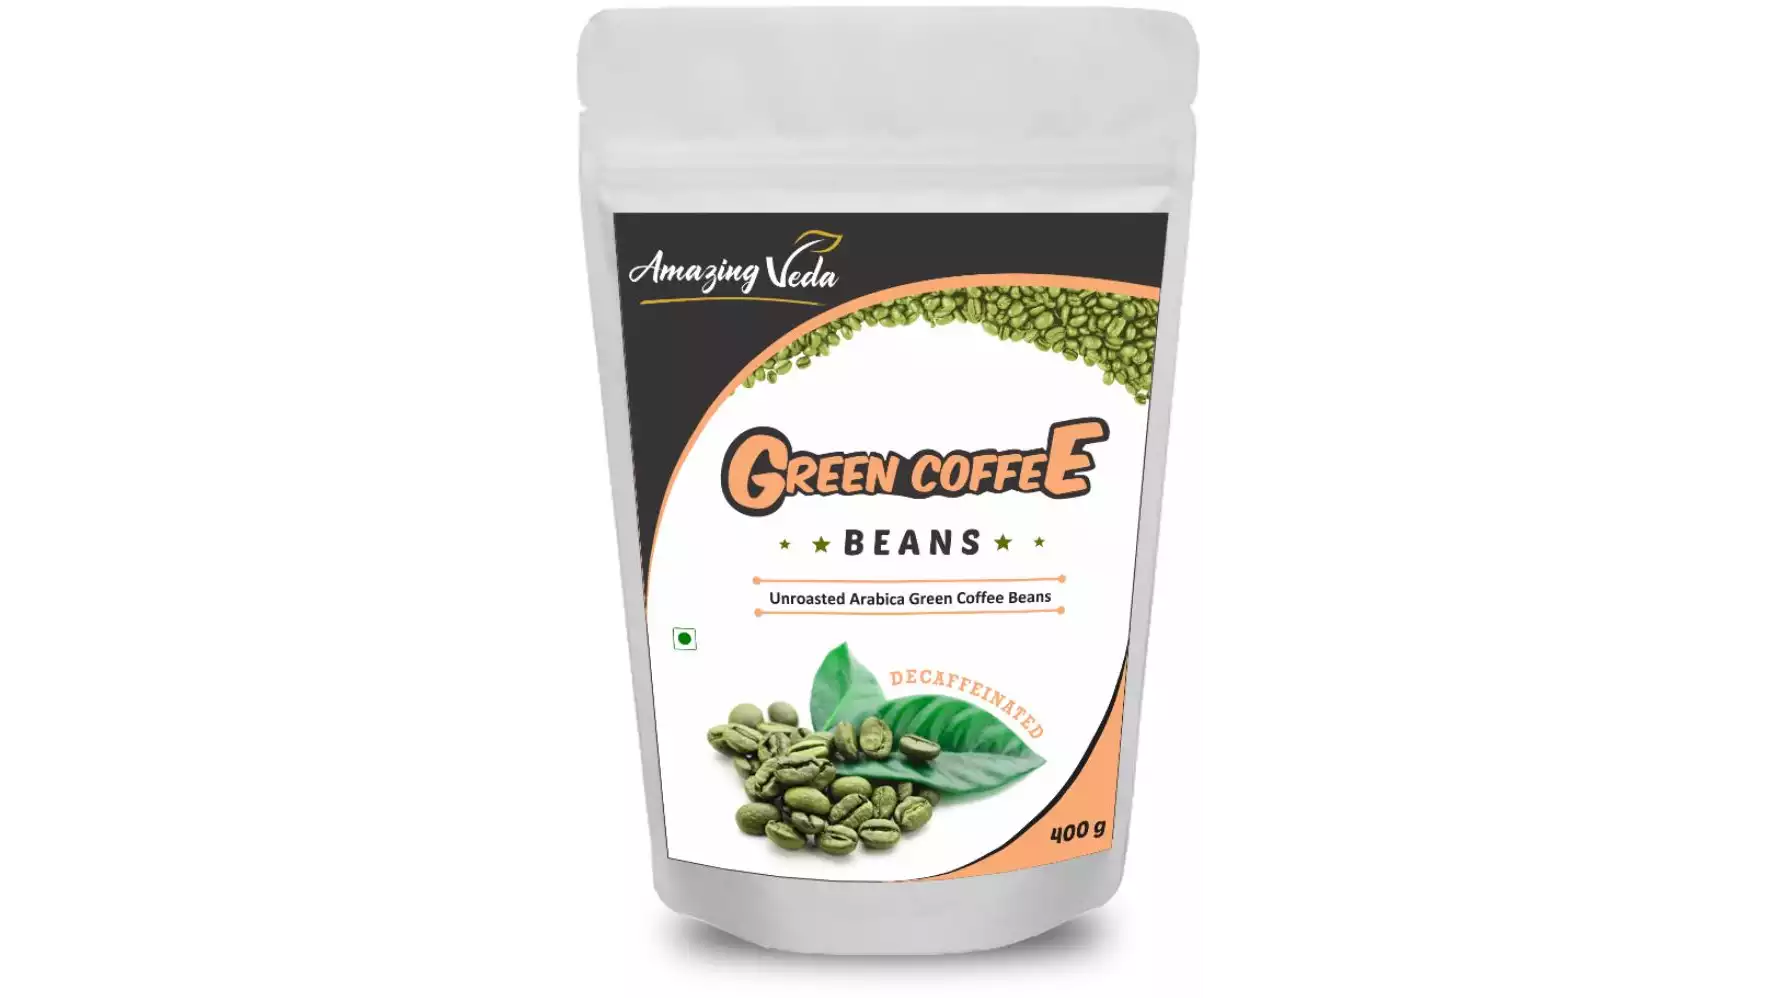 Amazing Veda Green Coffee Beans (400g)